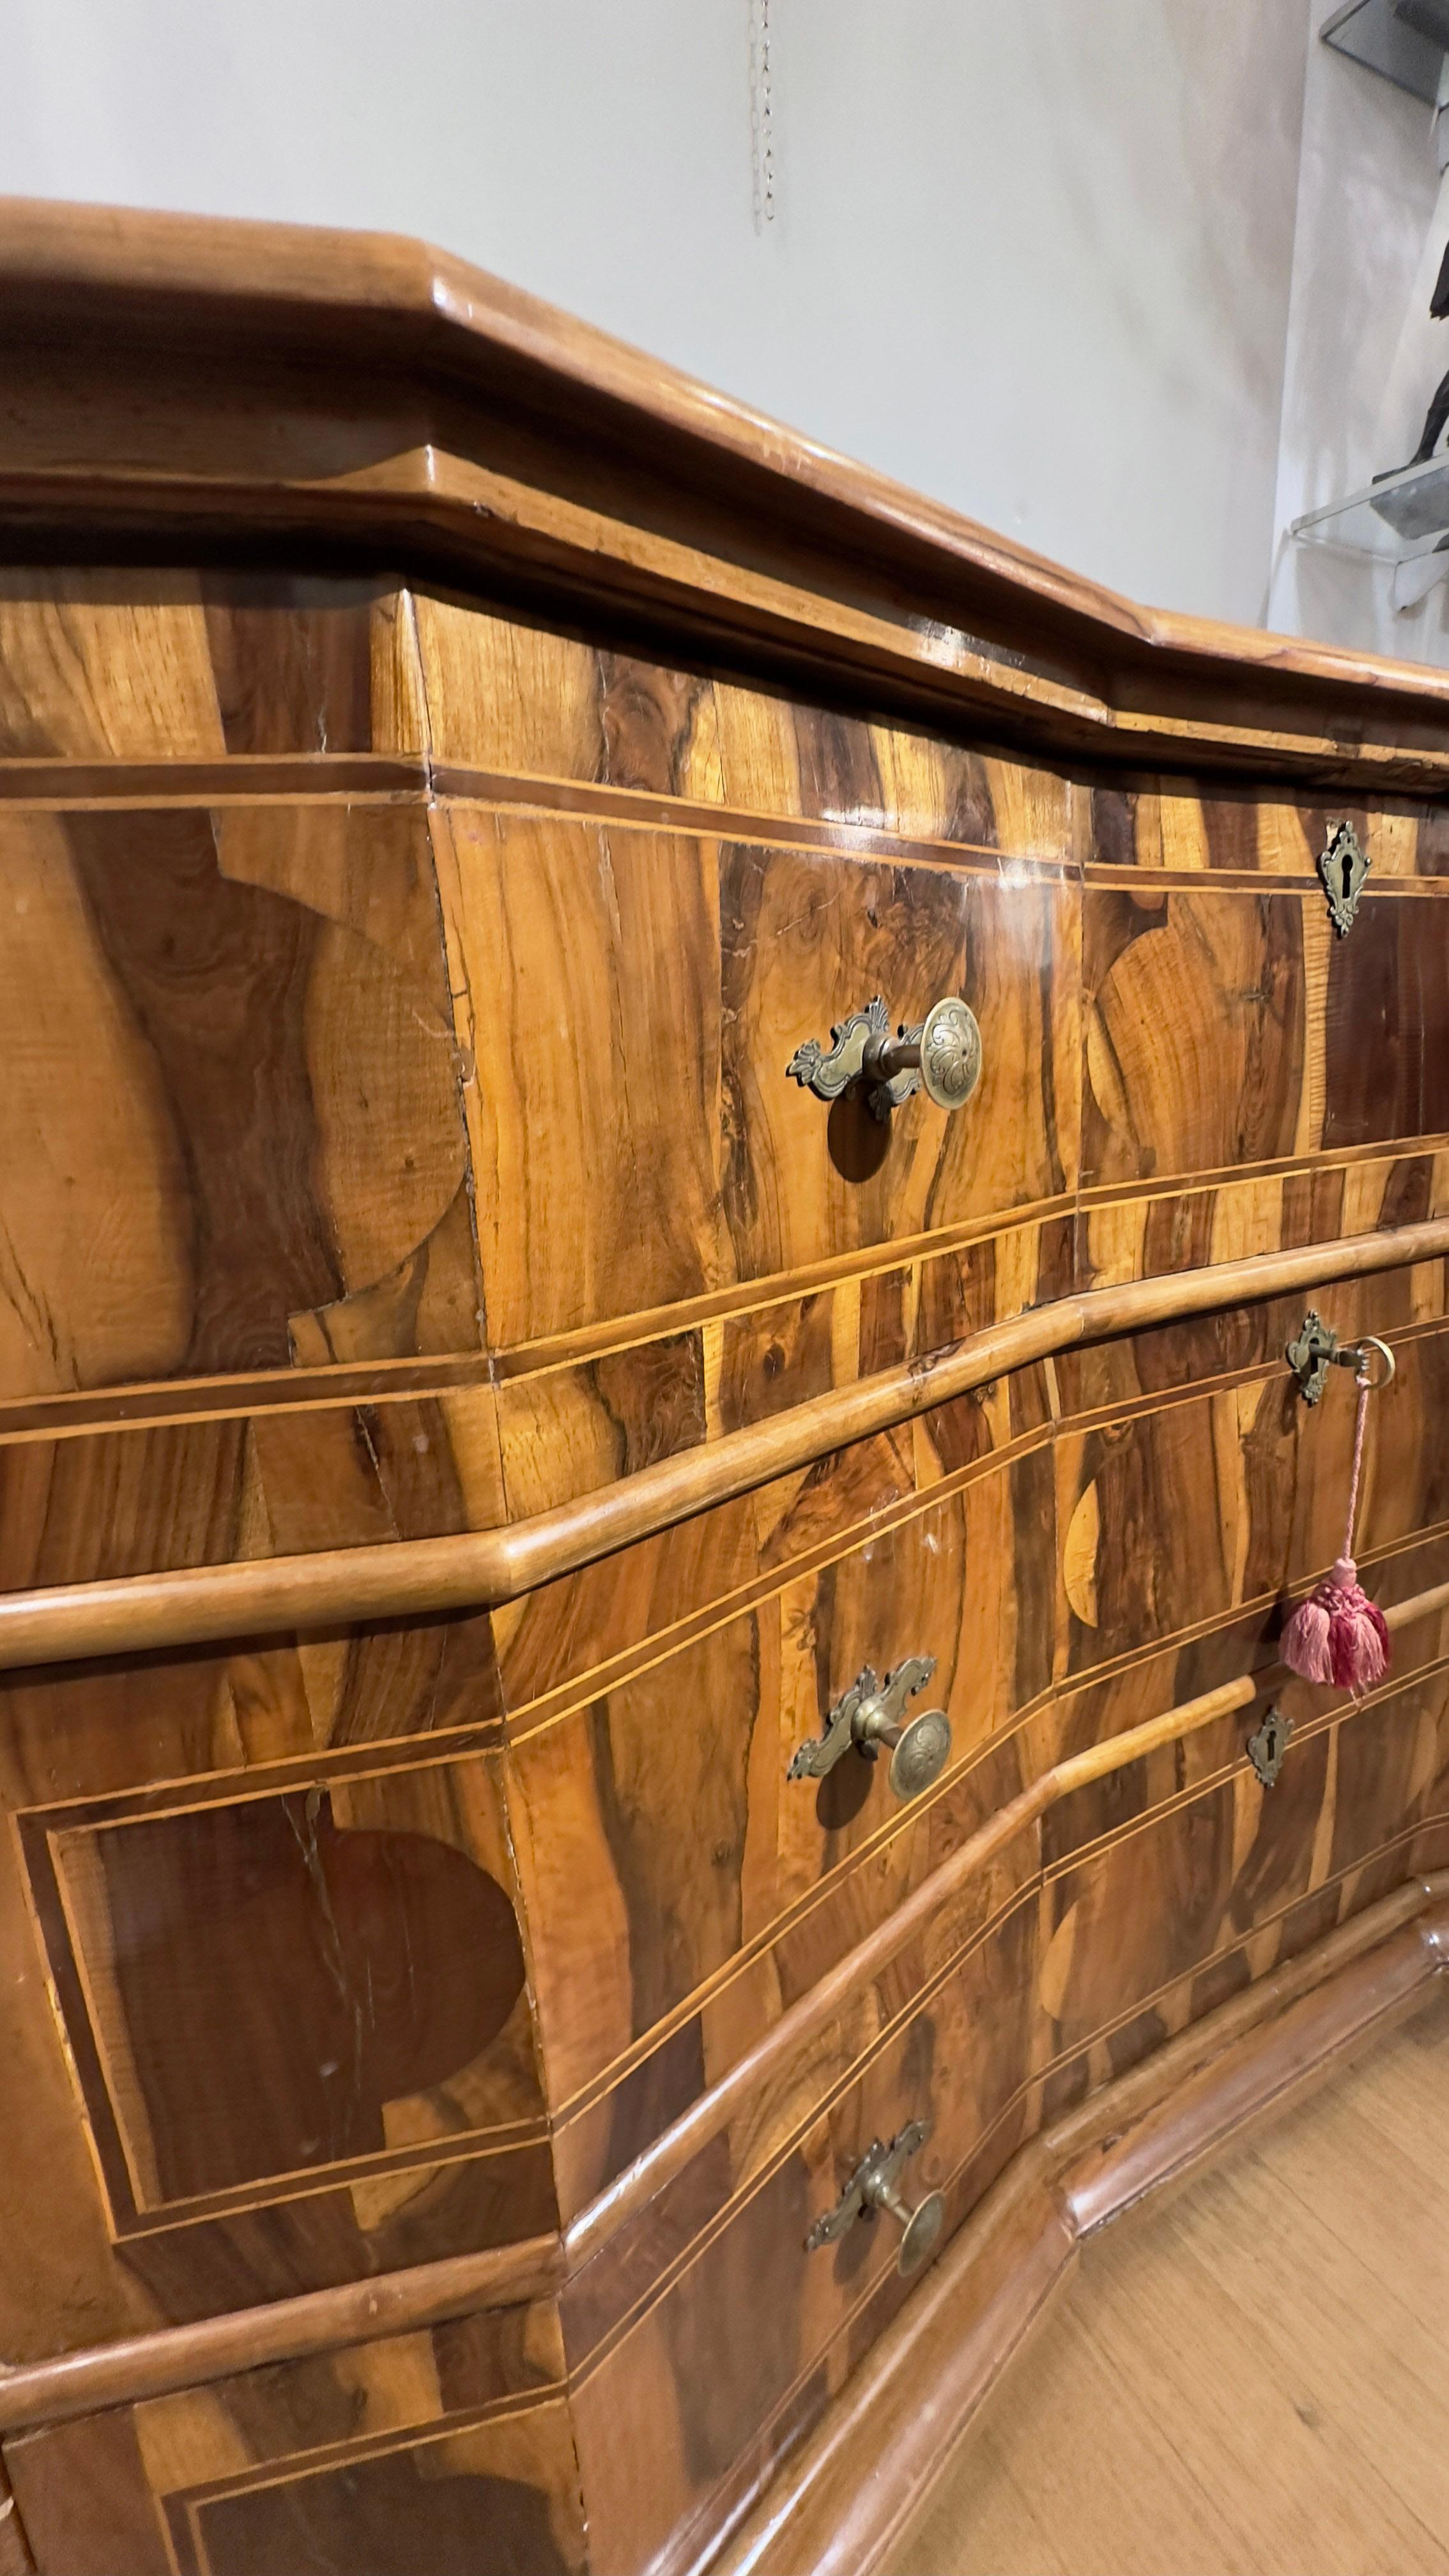 18th Century 18th CENTURY VENETIAN VENEREED AND INLAID CHEST For Sale